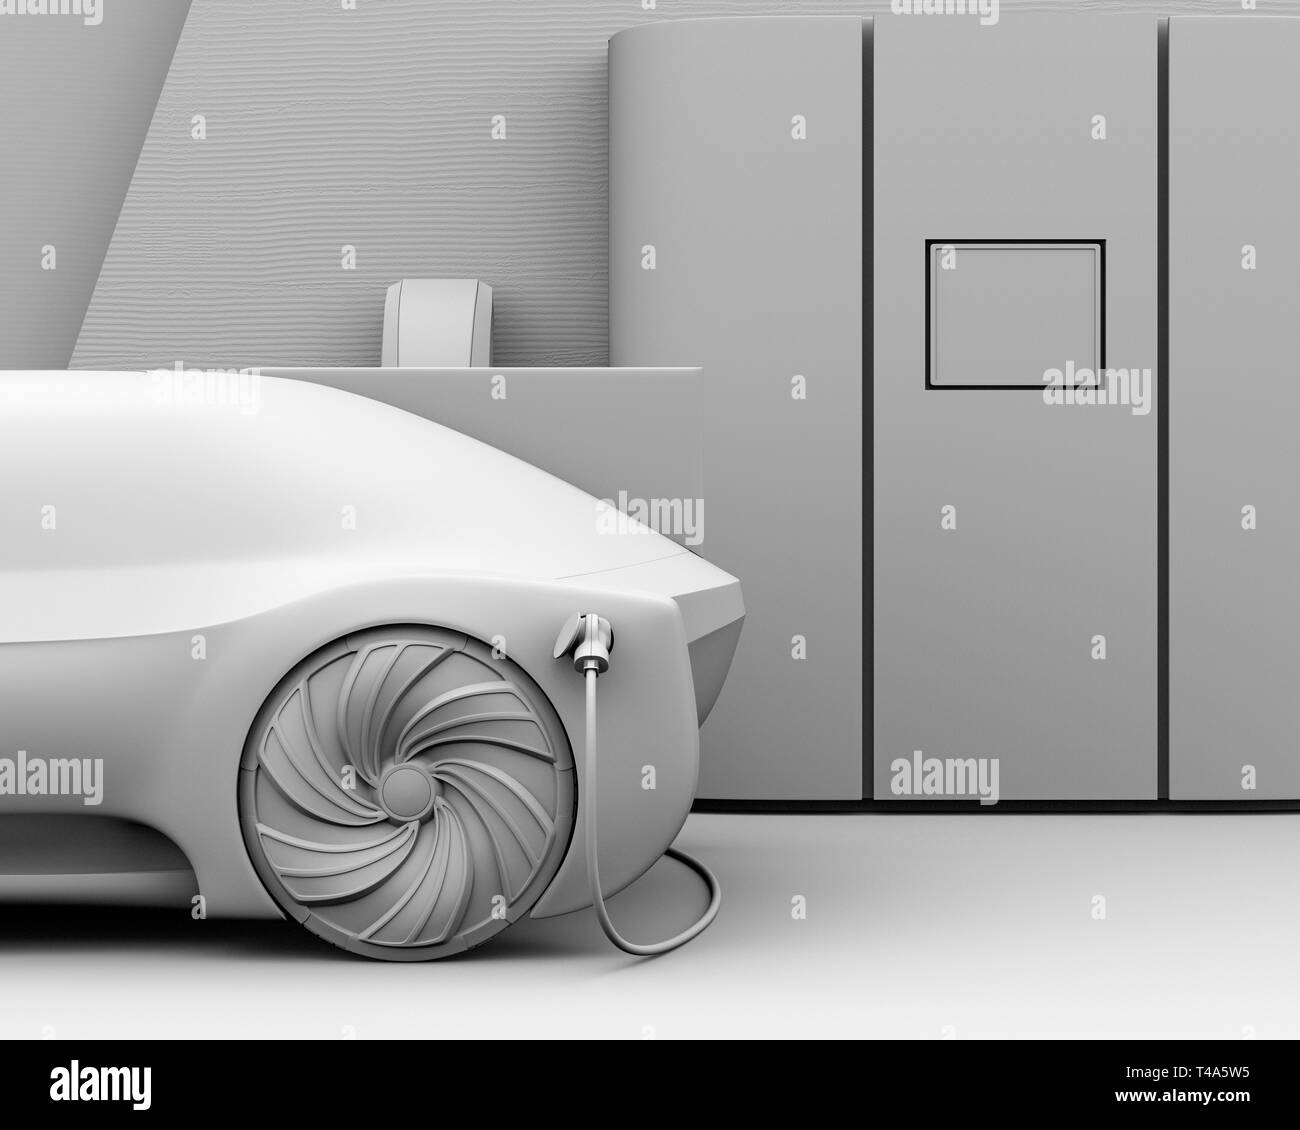 Clay rendering of Fuel Cell powered autonomous car filling gas in Fuel Cell Hydrogen Station. 3D rendering image. Stock Photo